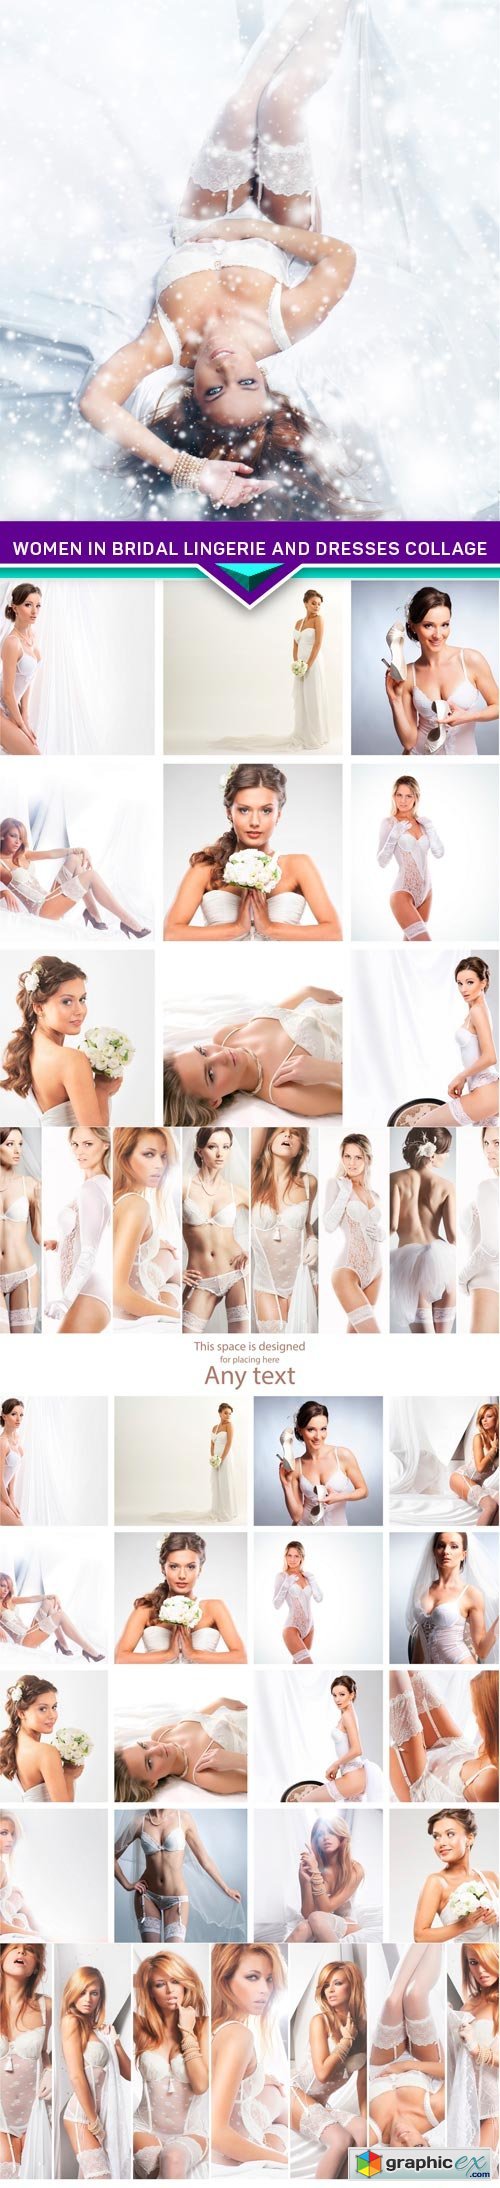 Women in bridal lingerie and dresses collage 5X JPEG